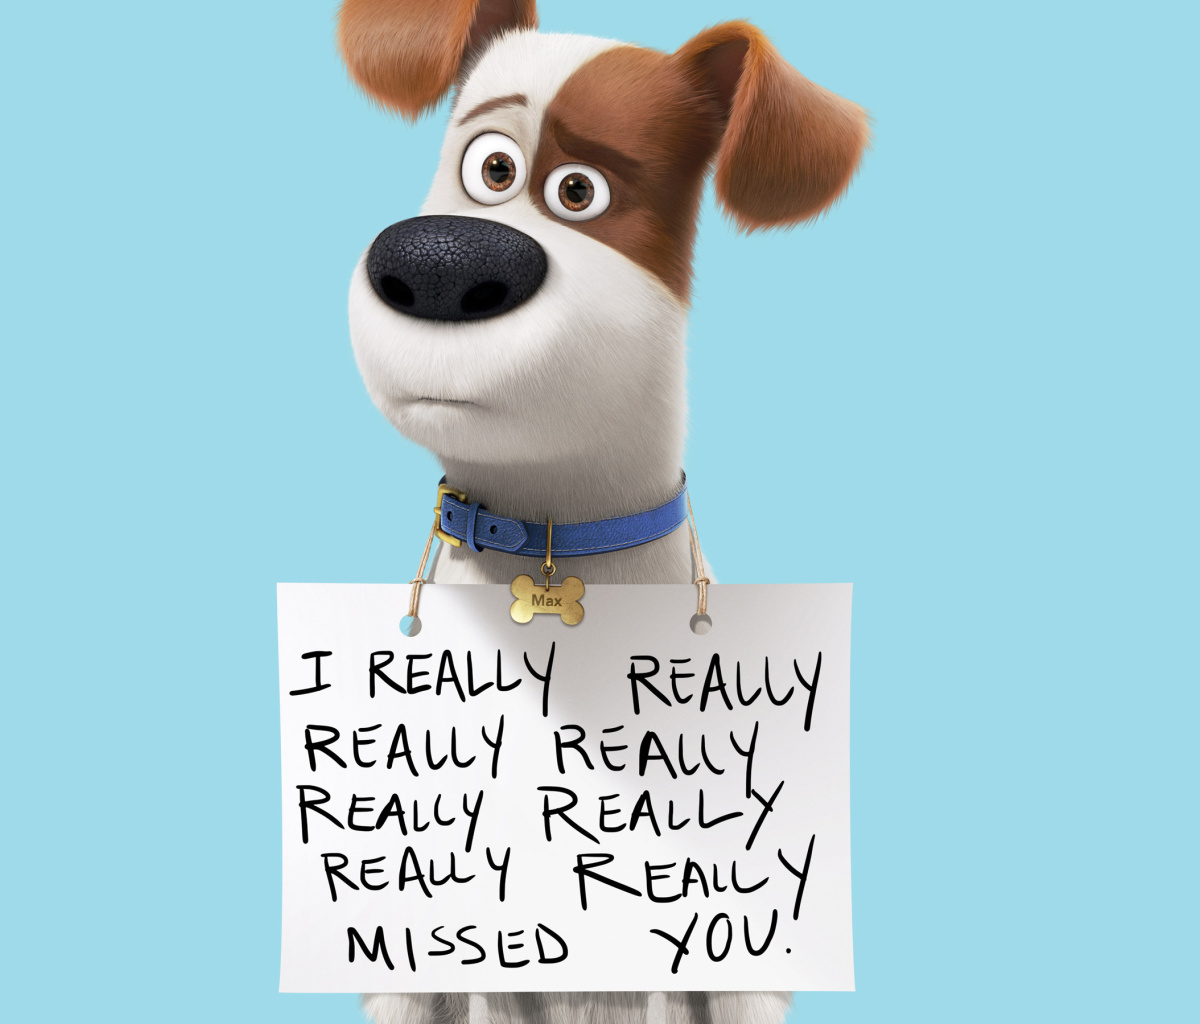 Max from The Secret Life of Pets screenshot #1 1200x1024